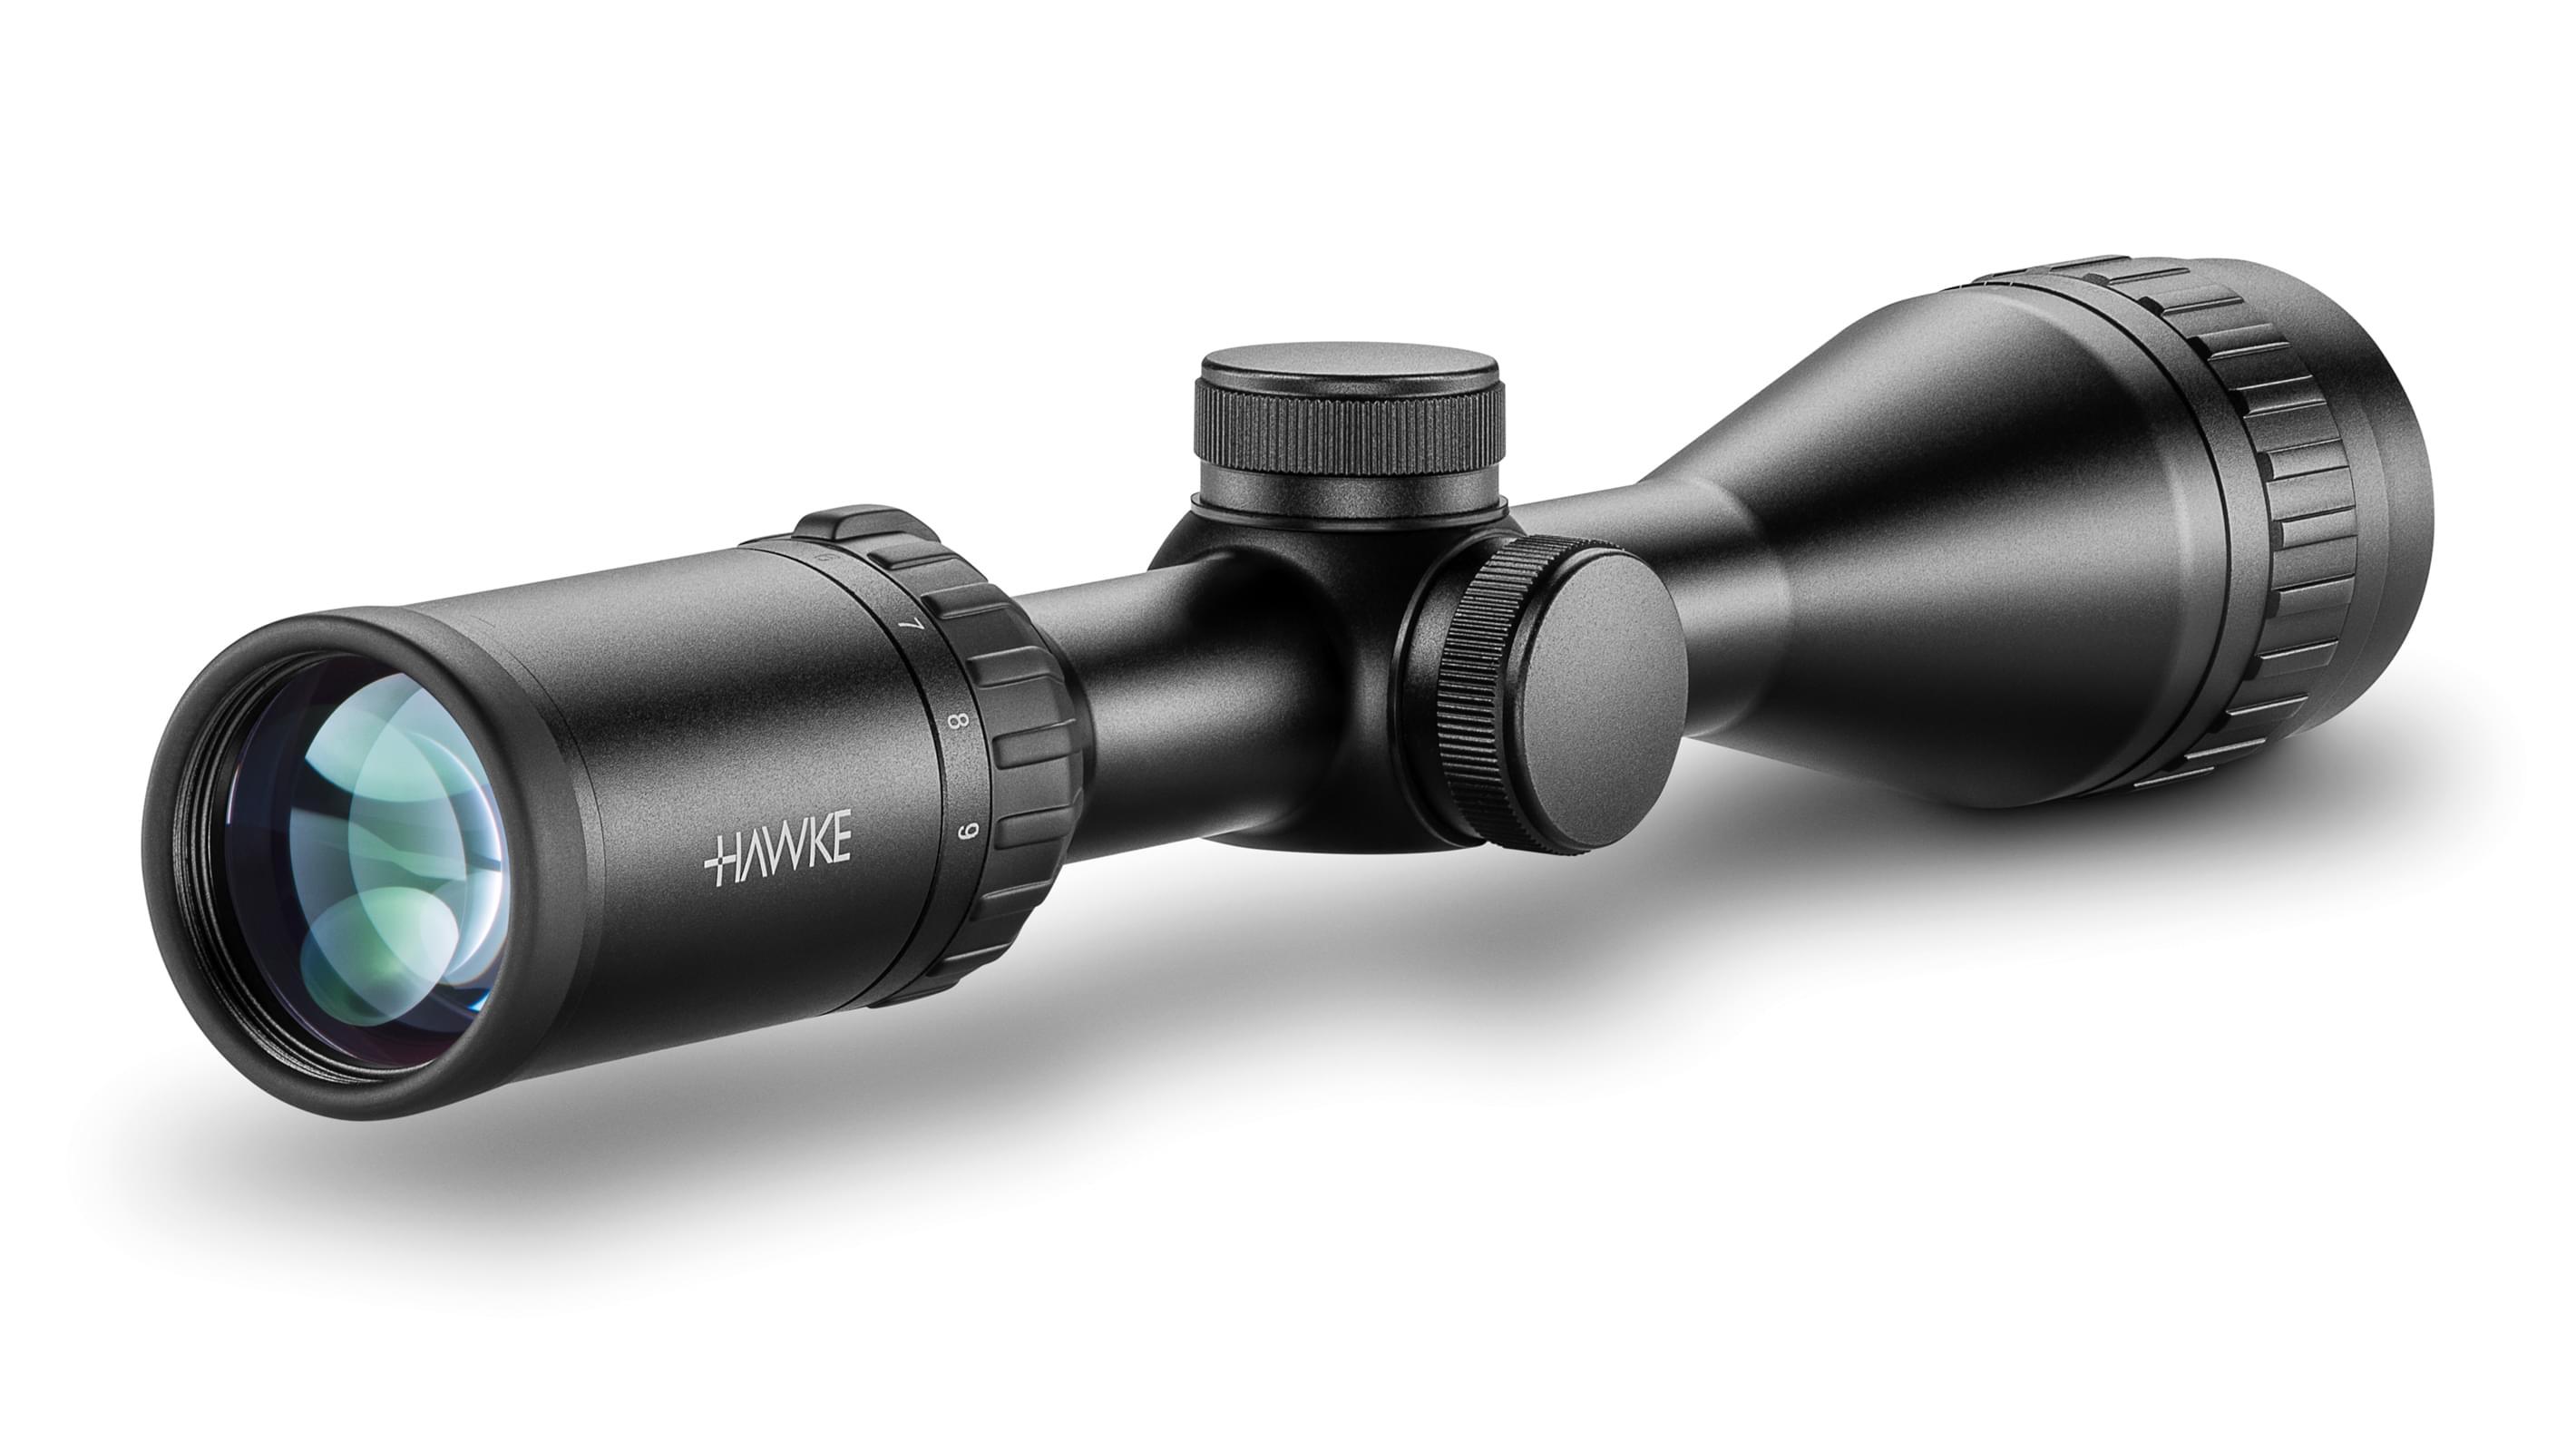 HAWKE AIRMAX 3-9x40 AO SCOPE AMX RETICLE - 13110 - NeonSales South Africa